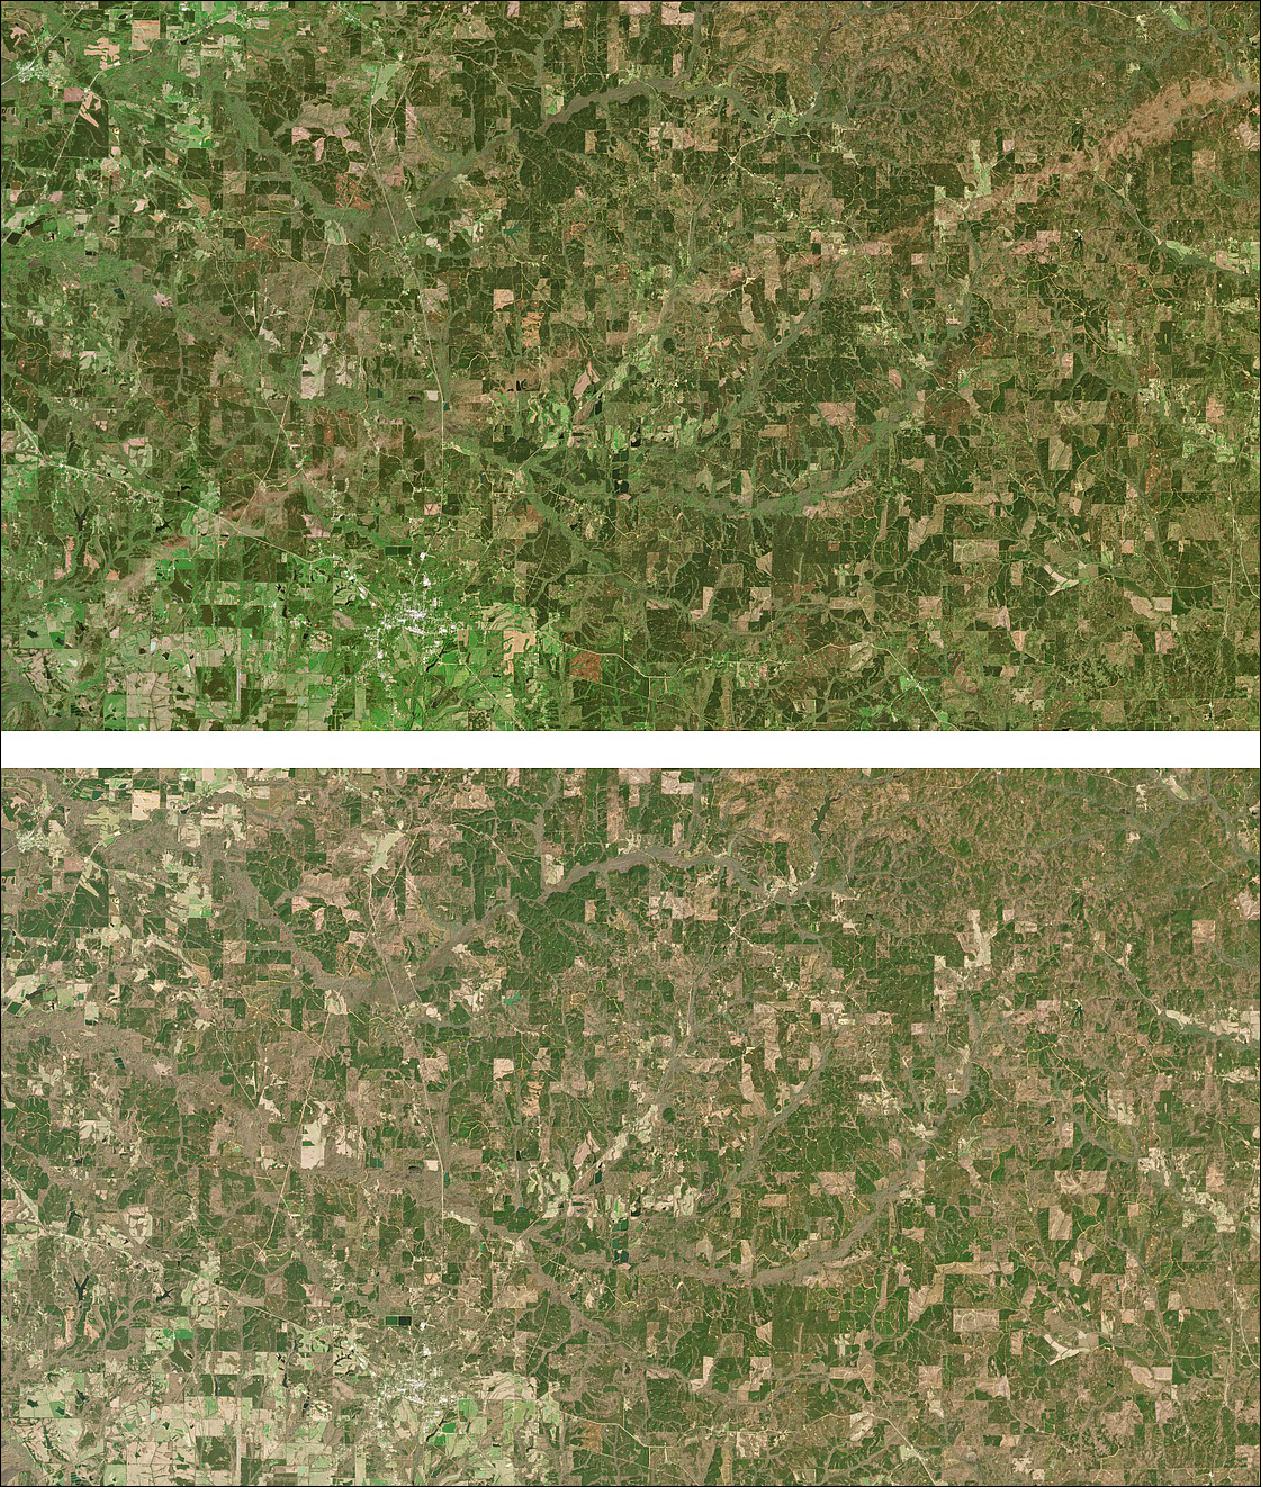 Figure 9: Tornado path mapping. These two true color PlanetScope images show the damage caused by the longest tornado to touch down during a storm on the night of March 25, 2020 in central Alabama. This tornado, an EF3, left a path of damage that was 80 miles long (image credit: Planet)